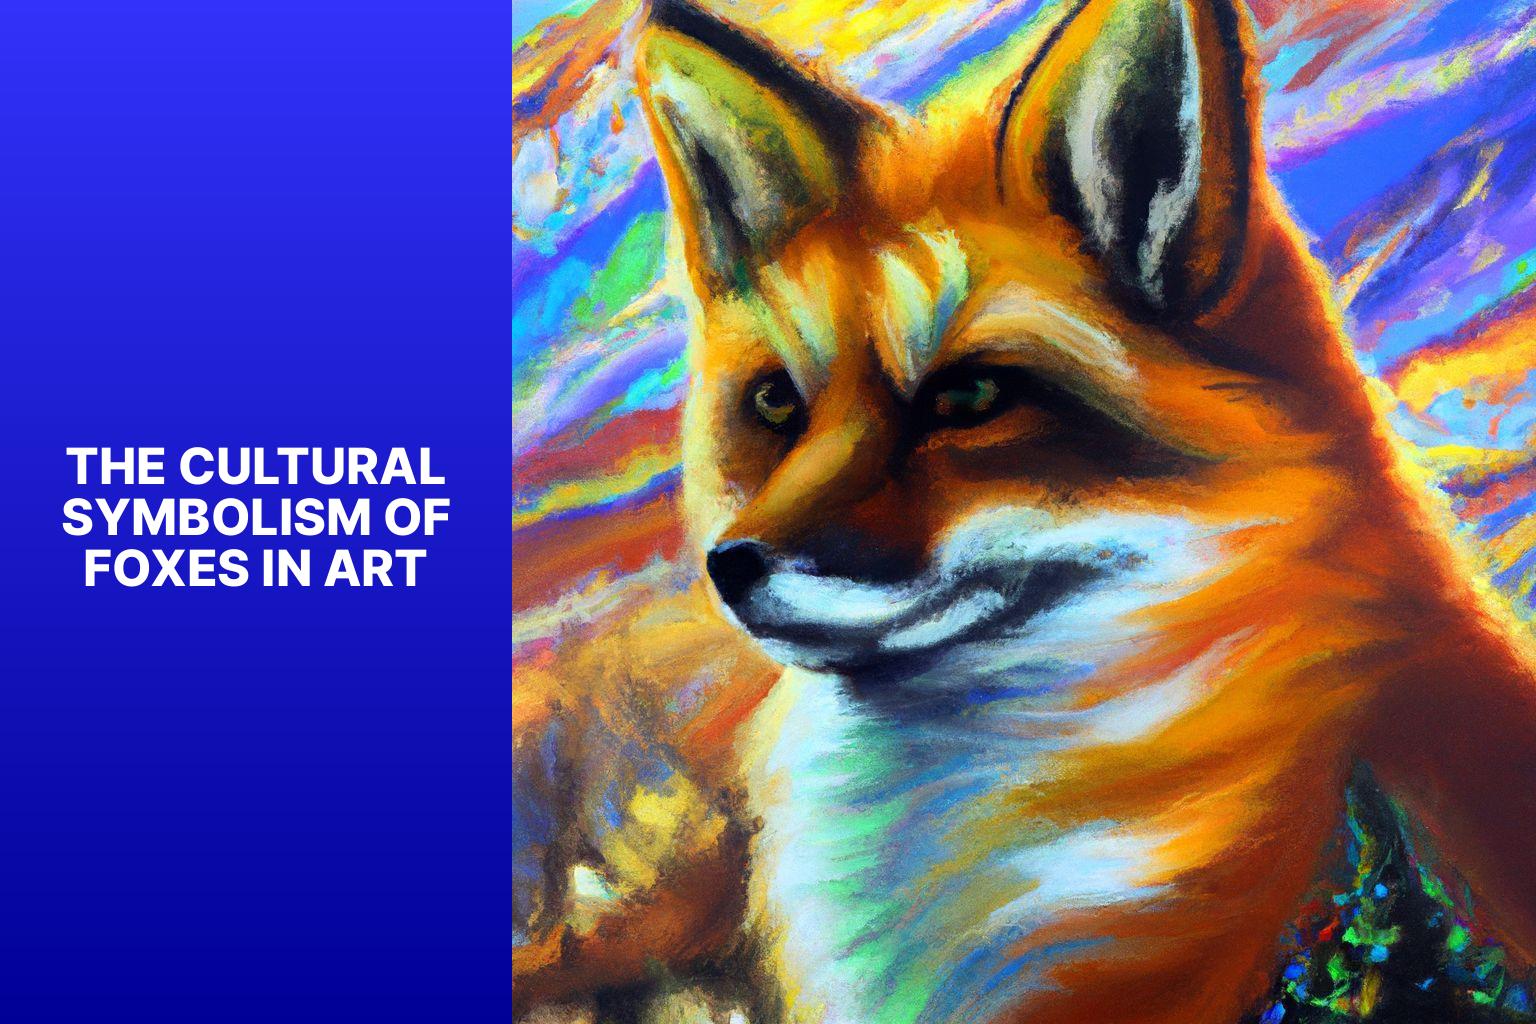 The Cultural Symbolism of Foxes in Art - Fox Myths in Art 